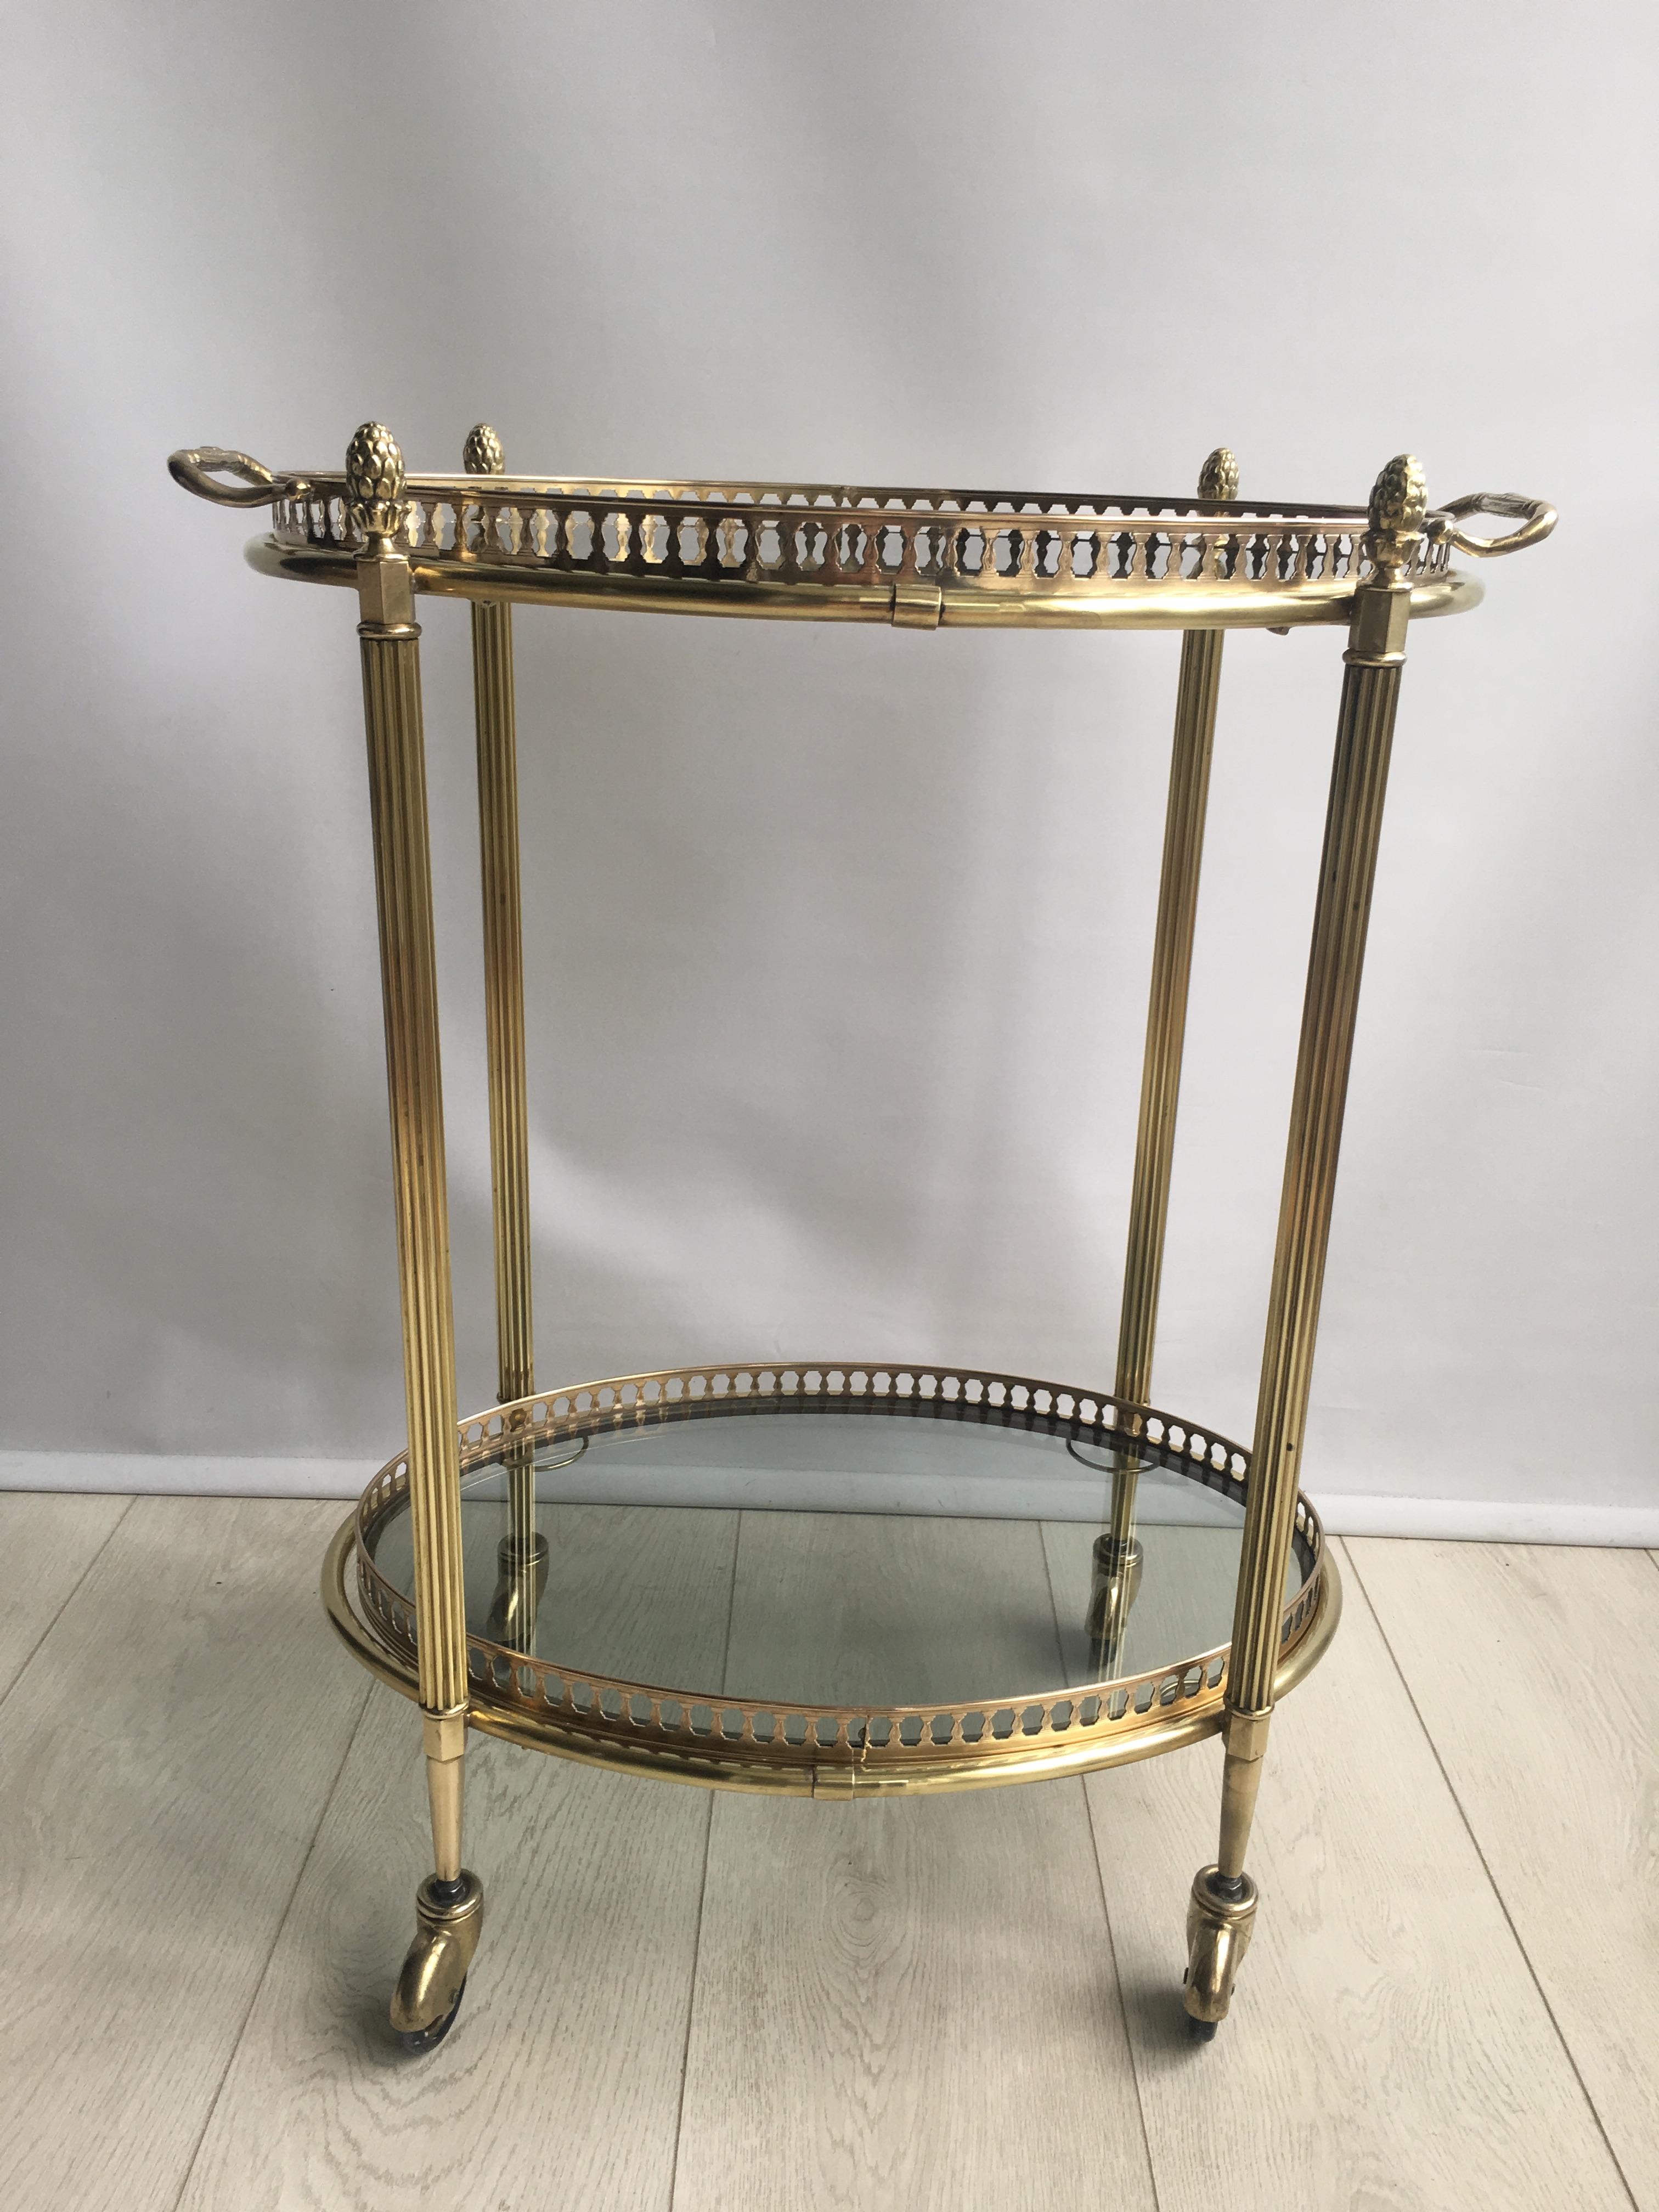 Vintage oval drinks trolley from France, circa 1950.

Polished brass frame with lift off top tray. 

Smoked grey glass trays.

Perfect for smaller spaces.

Overall dimenions 53cm wide, 34cm deep and 66cm tall (62cm to glass).